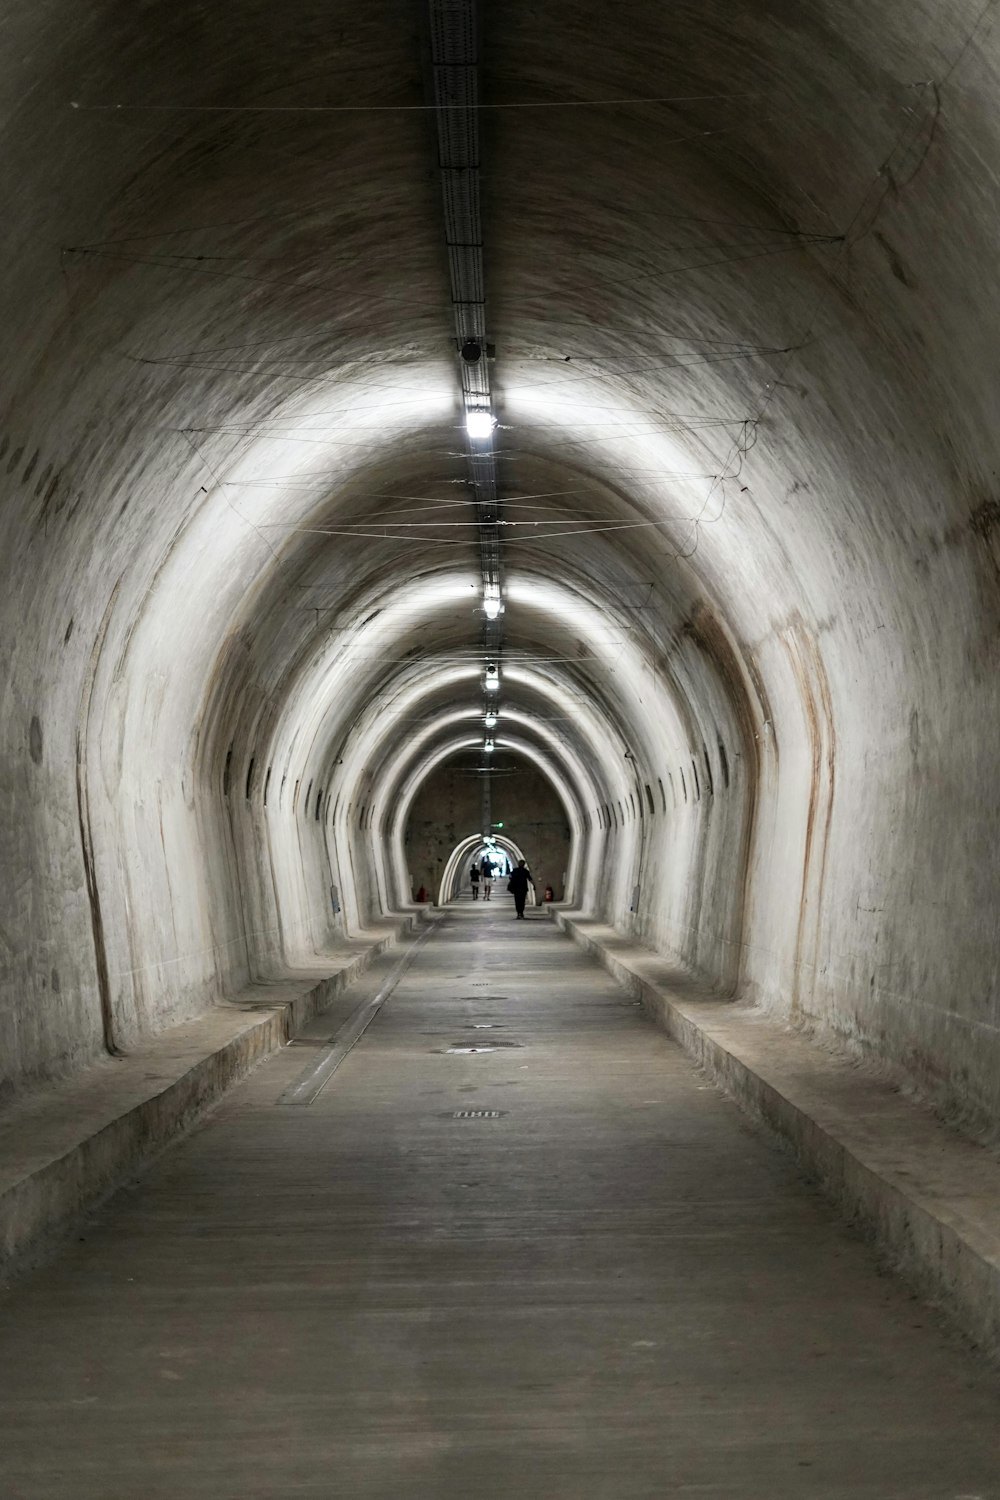 a long tunnel with a person walking down it